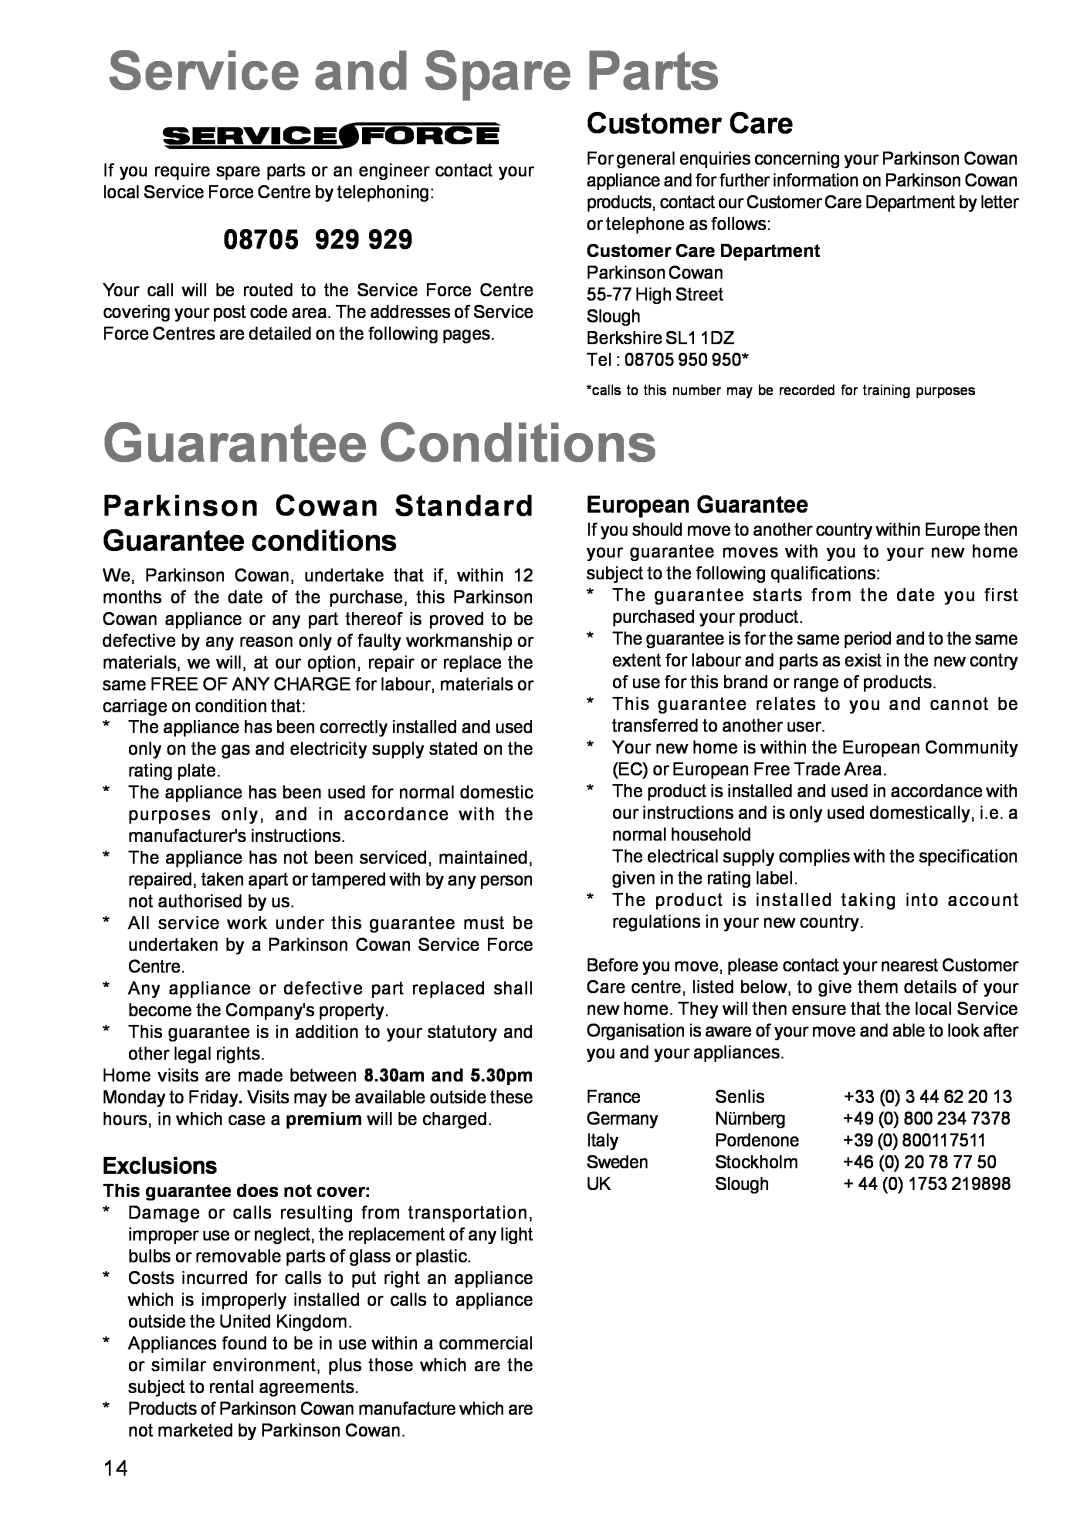 Electrolux CSIG 509 Service and Spare Parts, Guarantee Conditions, Customer Care, 08705, Exclusions, European Guarantee 